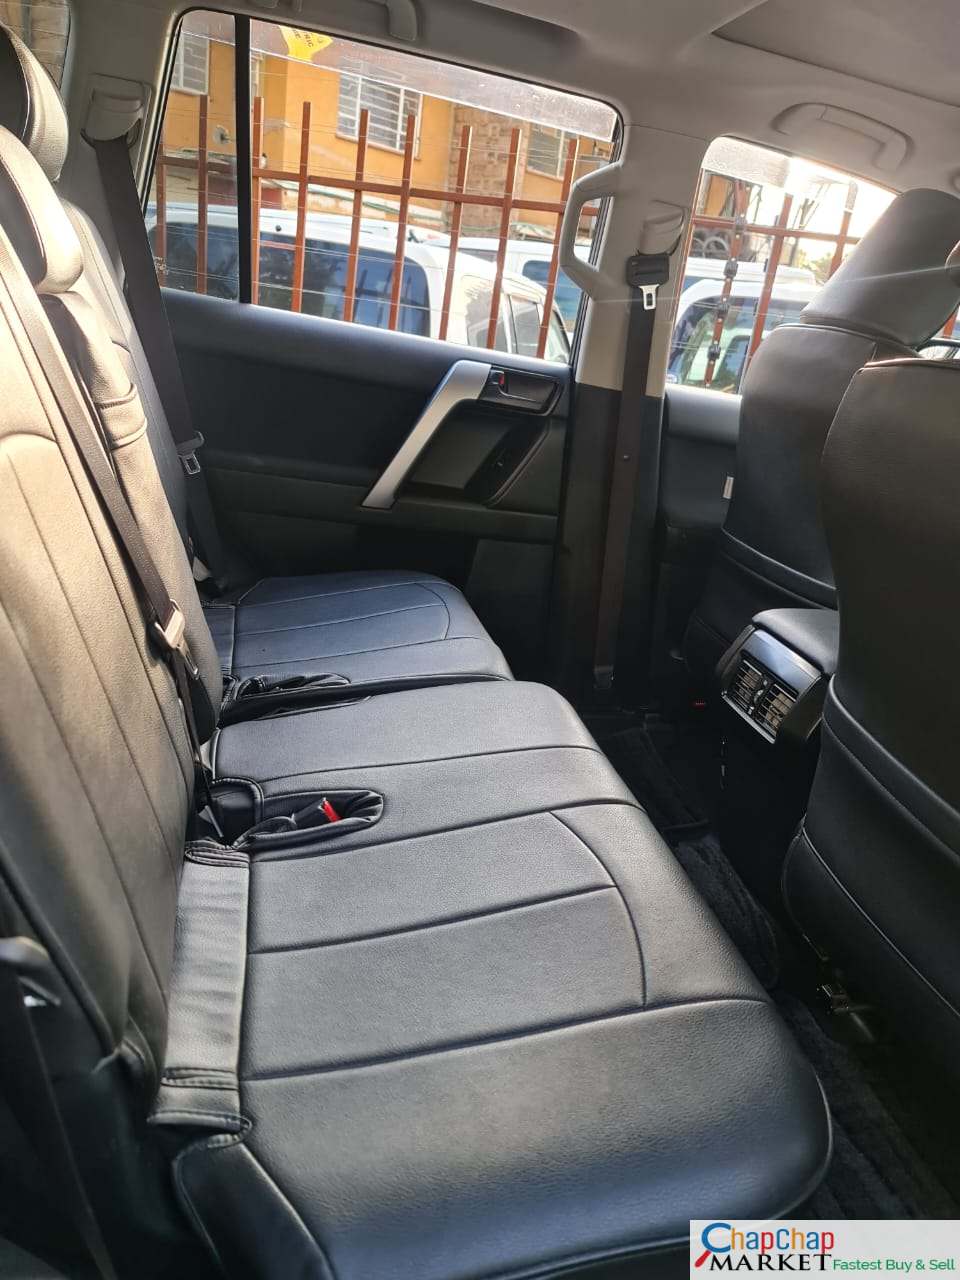 Toyota PRADO 2017 Sunroof 5.5M ONLY Quick SALE TRADE IN OK EXCLUSIVE!